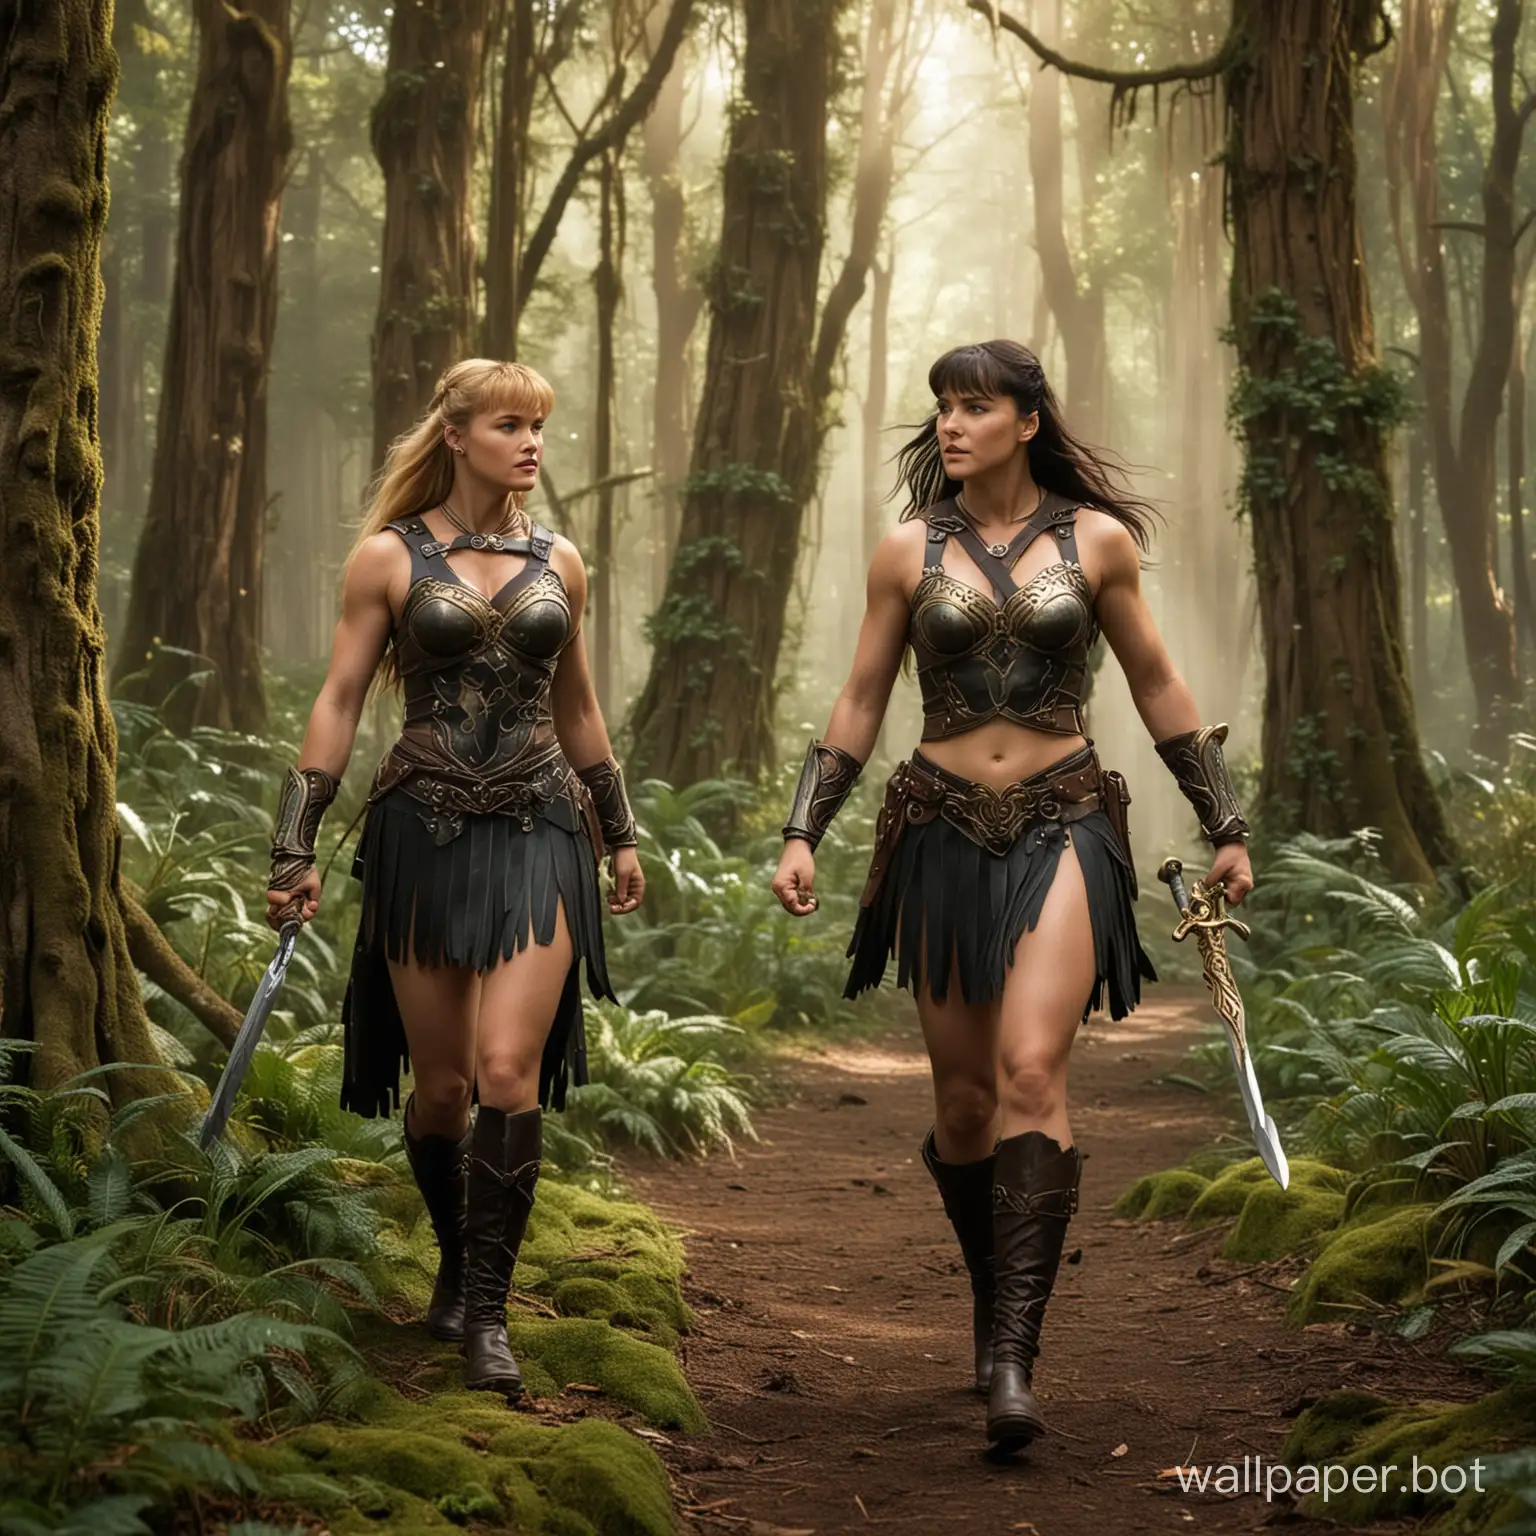 Xena-and-Gabrielle-Encounter-Hercules-in-Enchanted-Woods